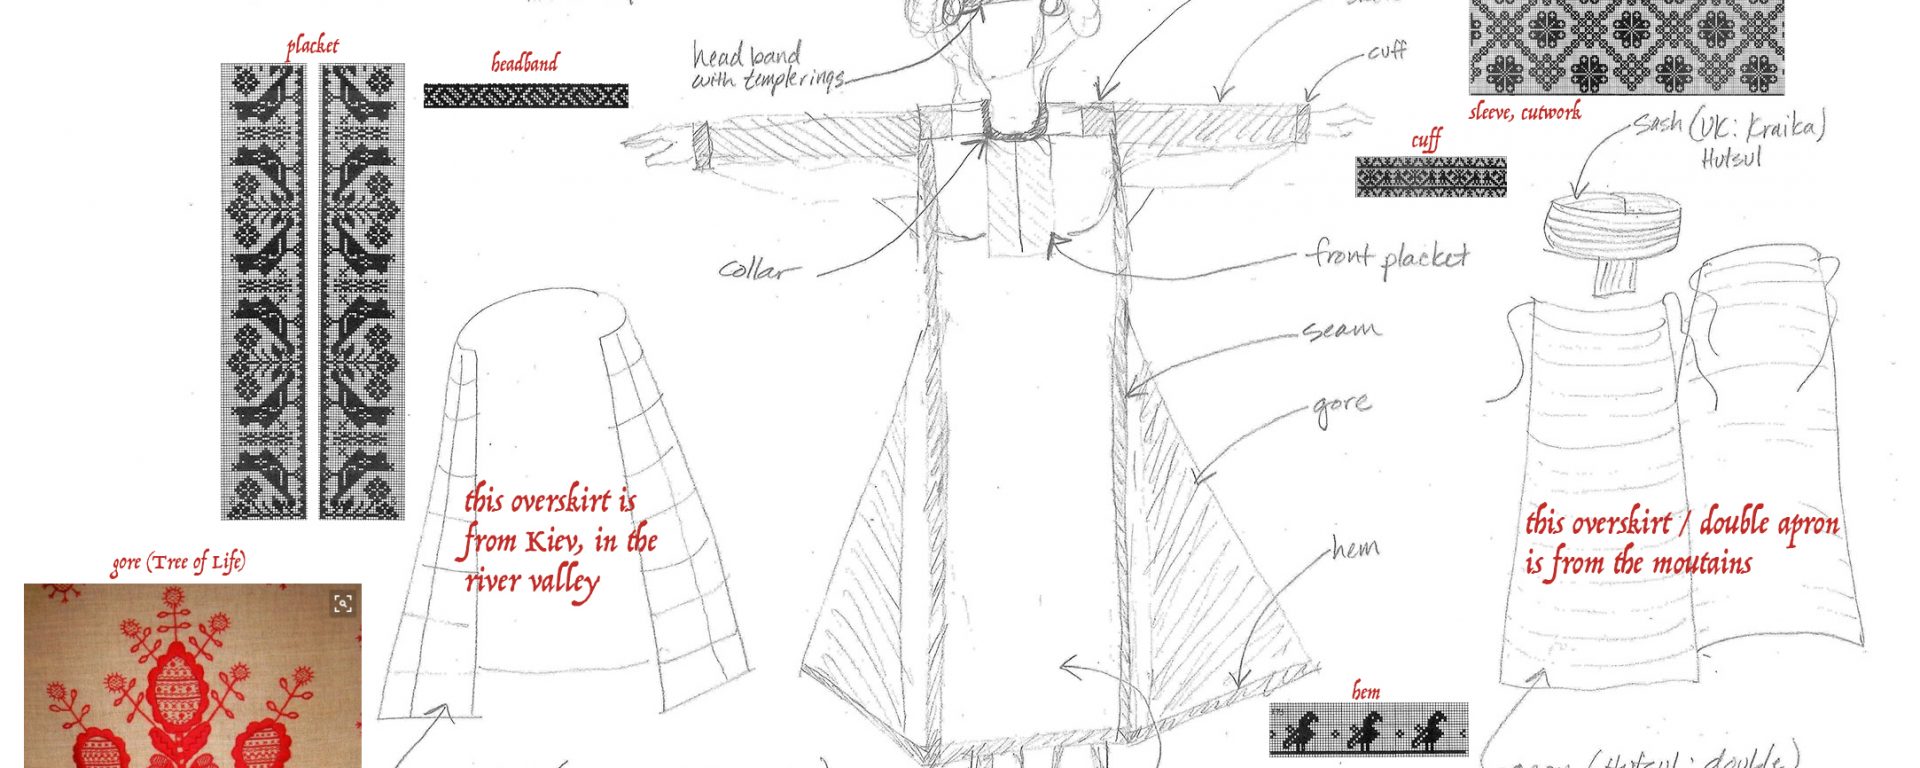 Plan for constructing an embroidered dress appropriate to 12th century Carpathian Basin